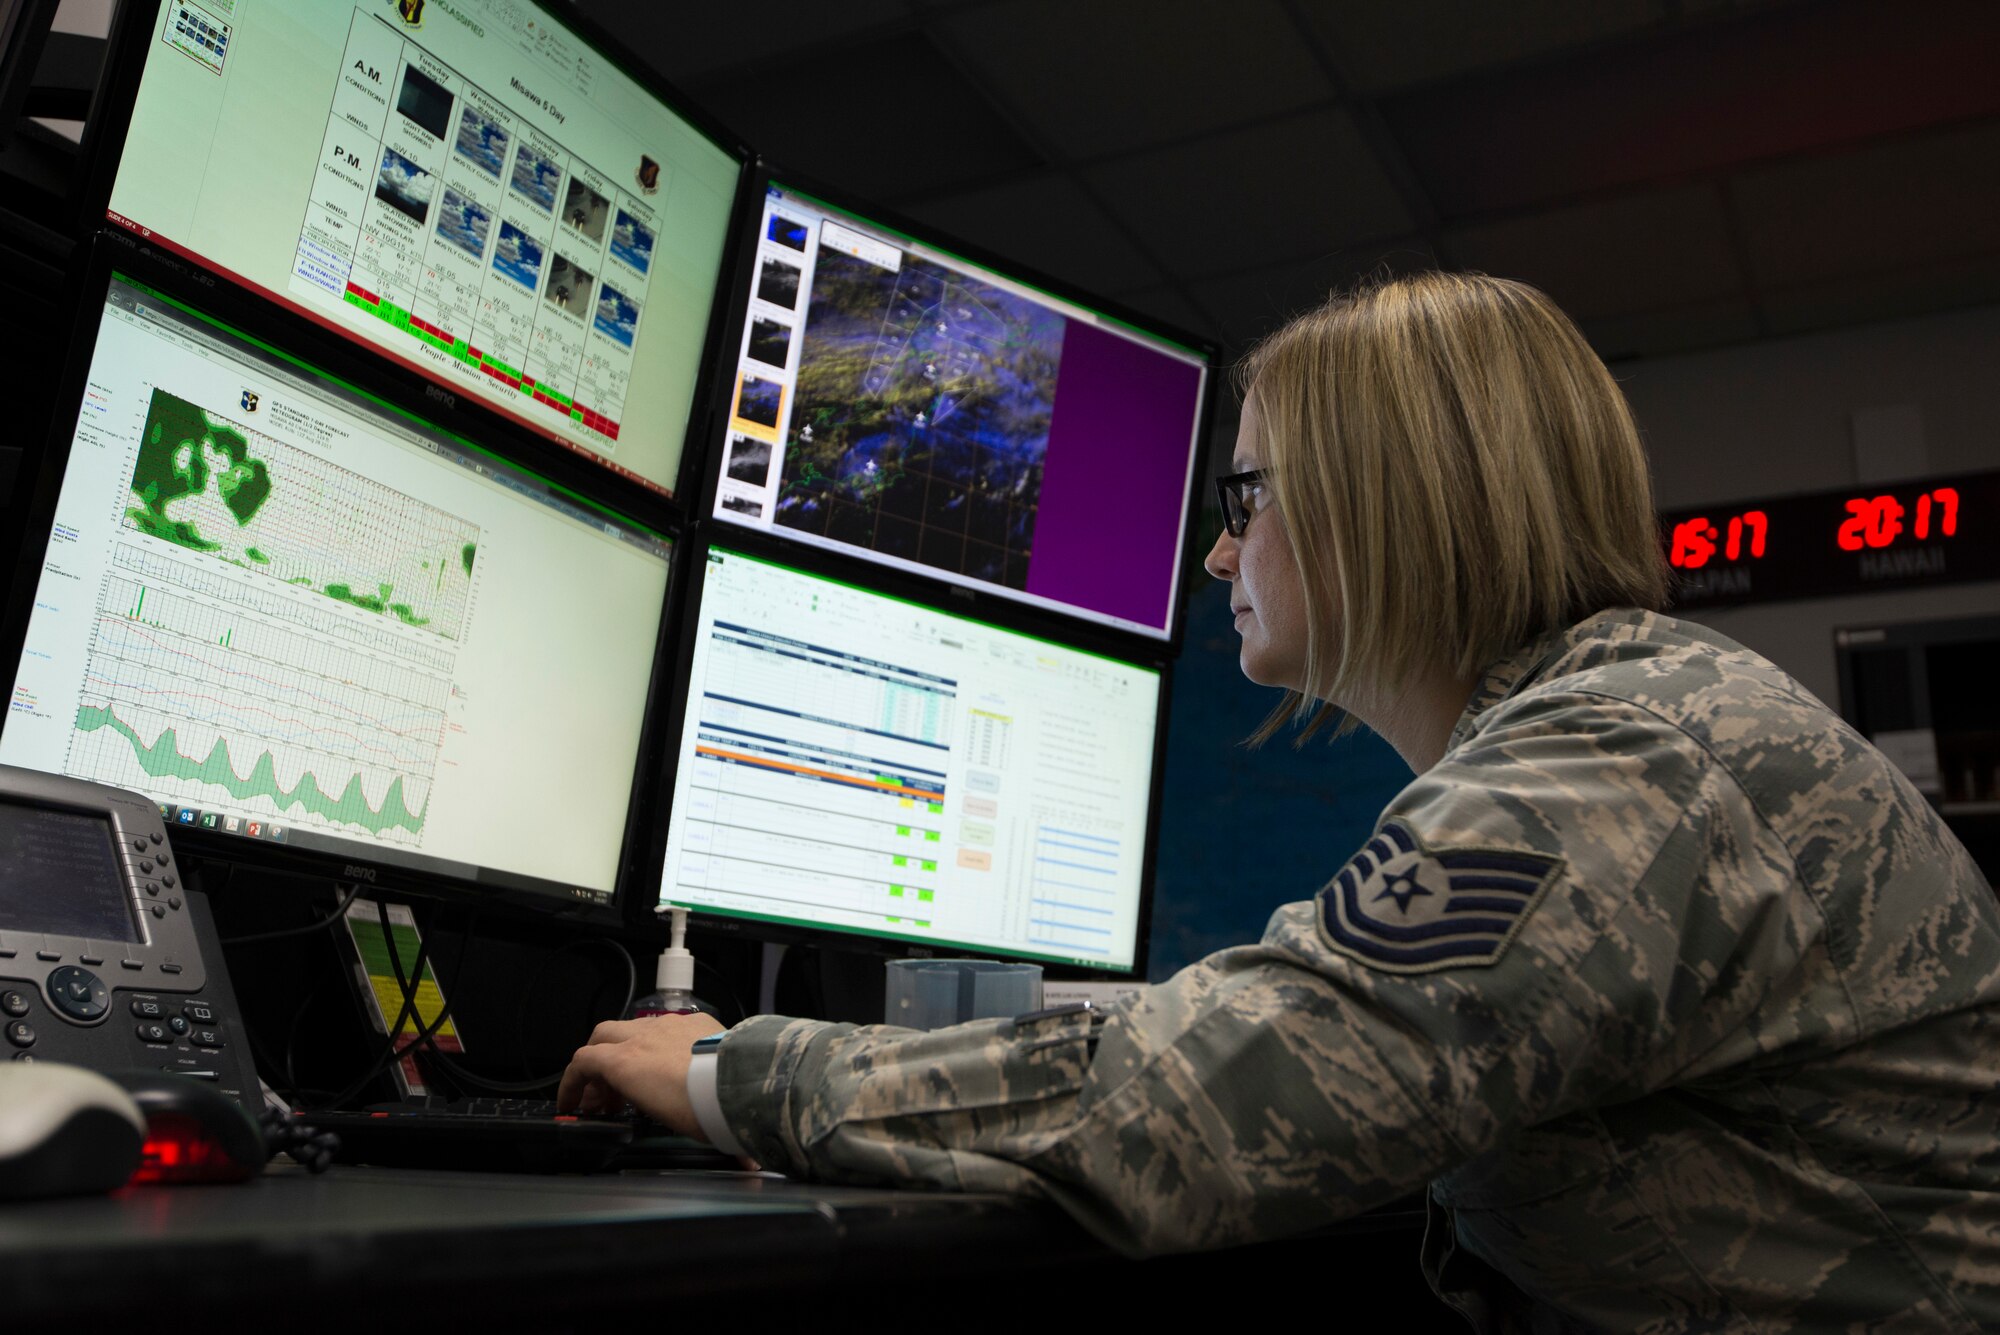 U.S. Air Force Tech. Sgt. Trisha Briggs, a 35th Operations Support Squadron weather forecaster, sends weekly weather results at Misawa Air Base, Japan, Aug. 29, 2017. The flight uses a computer based system, including radar, satellite and model outputs. Supporting flying missions by providing pilots with weather forecasts is their primary mission. (U.S. Air Force photo by Airman Xiomara M. Martinez)